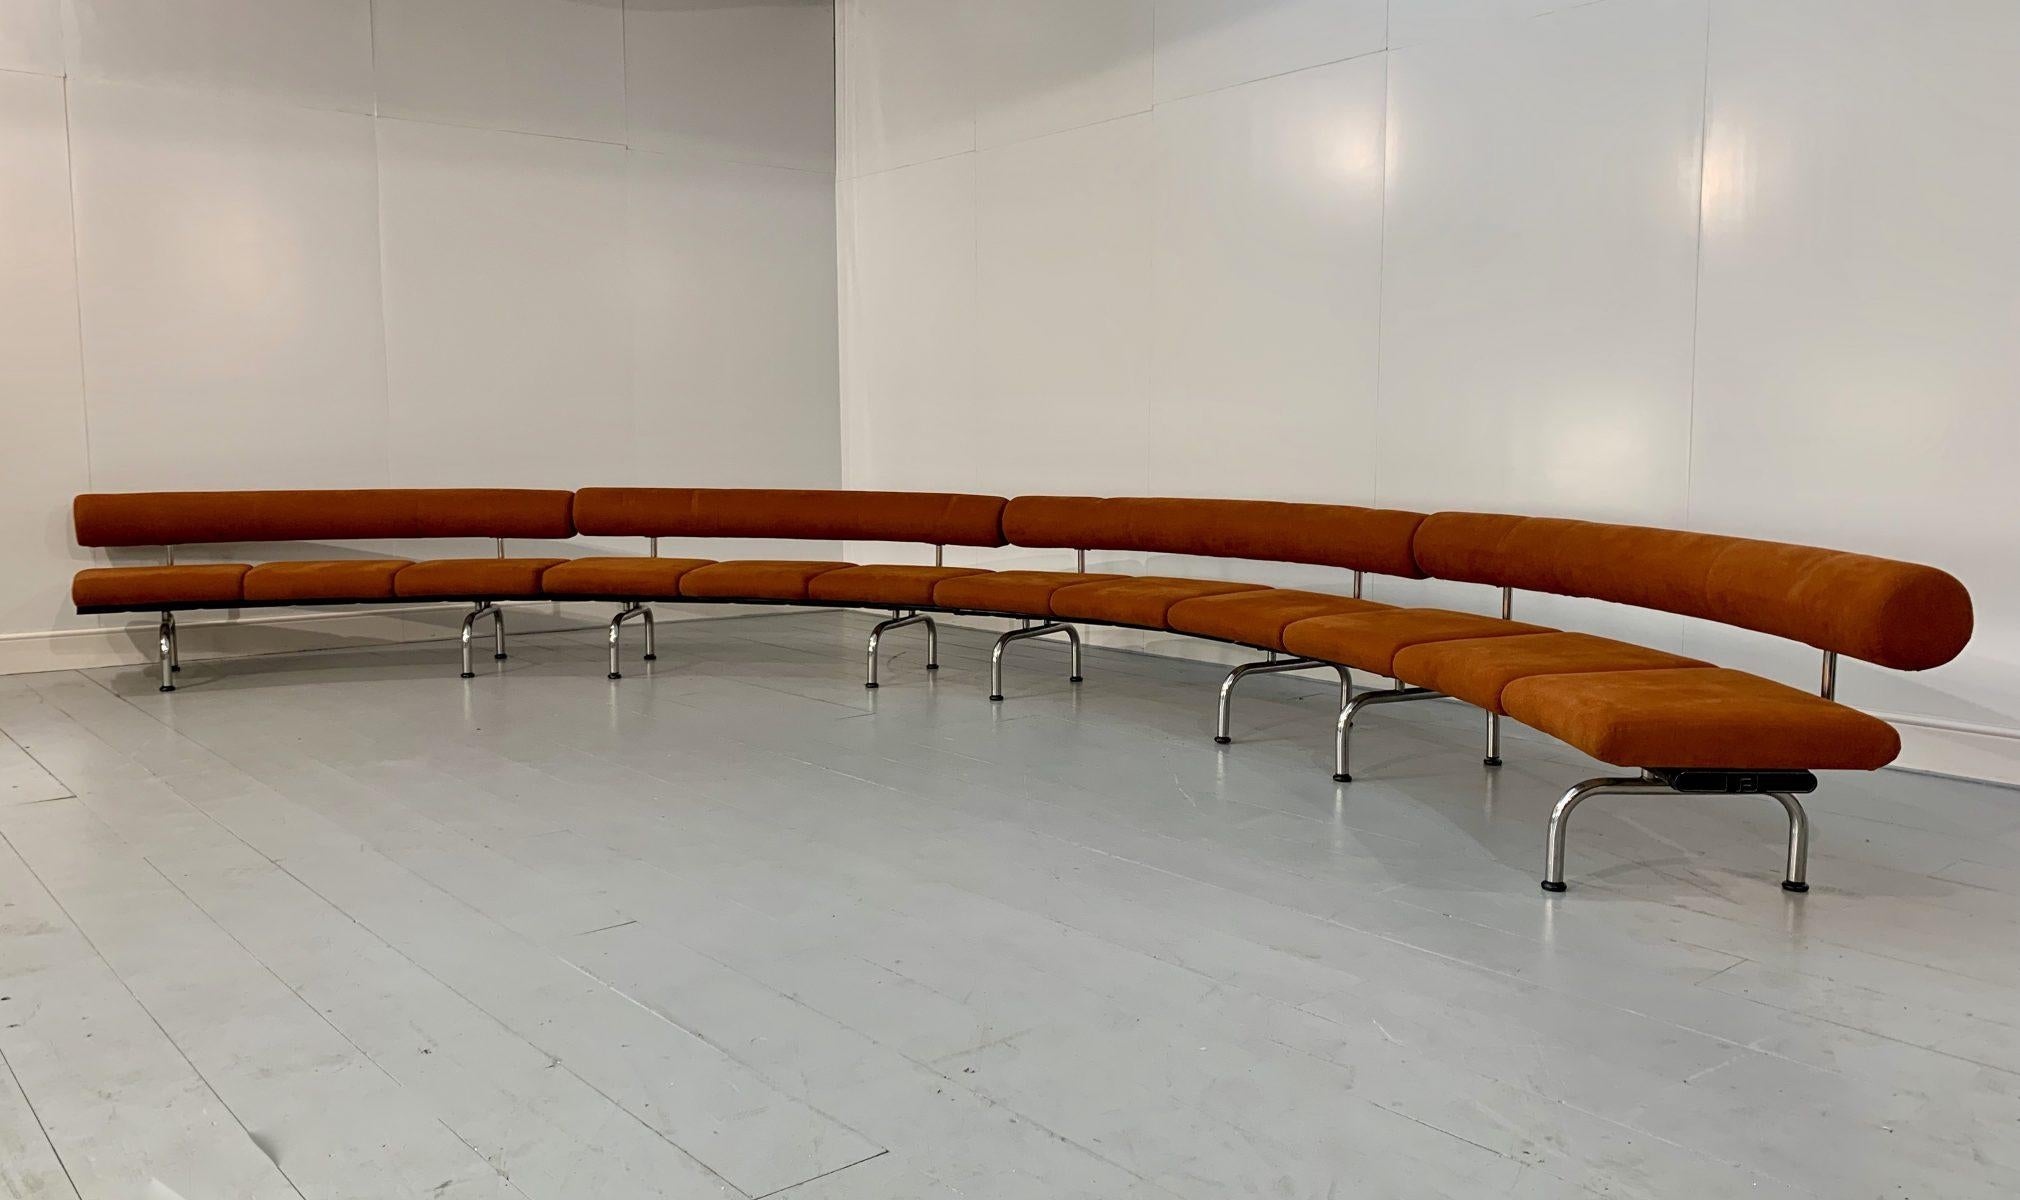 Hello Friends, and welcome to another unmissable offering from Lord Browns Furniture, the UK’s premier resource for fine Sofas and Chairs.

On offer on this occasion is a rare, huge, striking “Pipeline” sofa/bench consisting of 4 identical